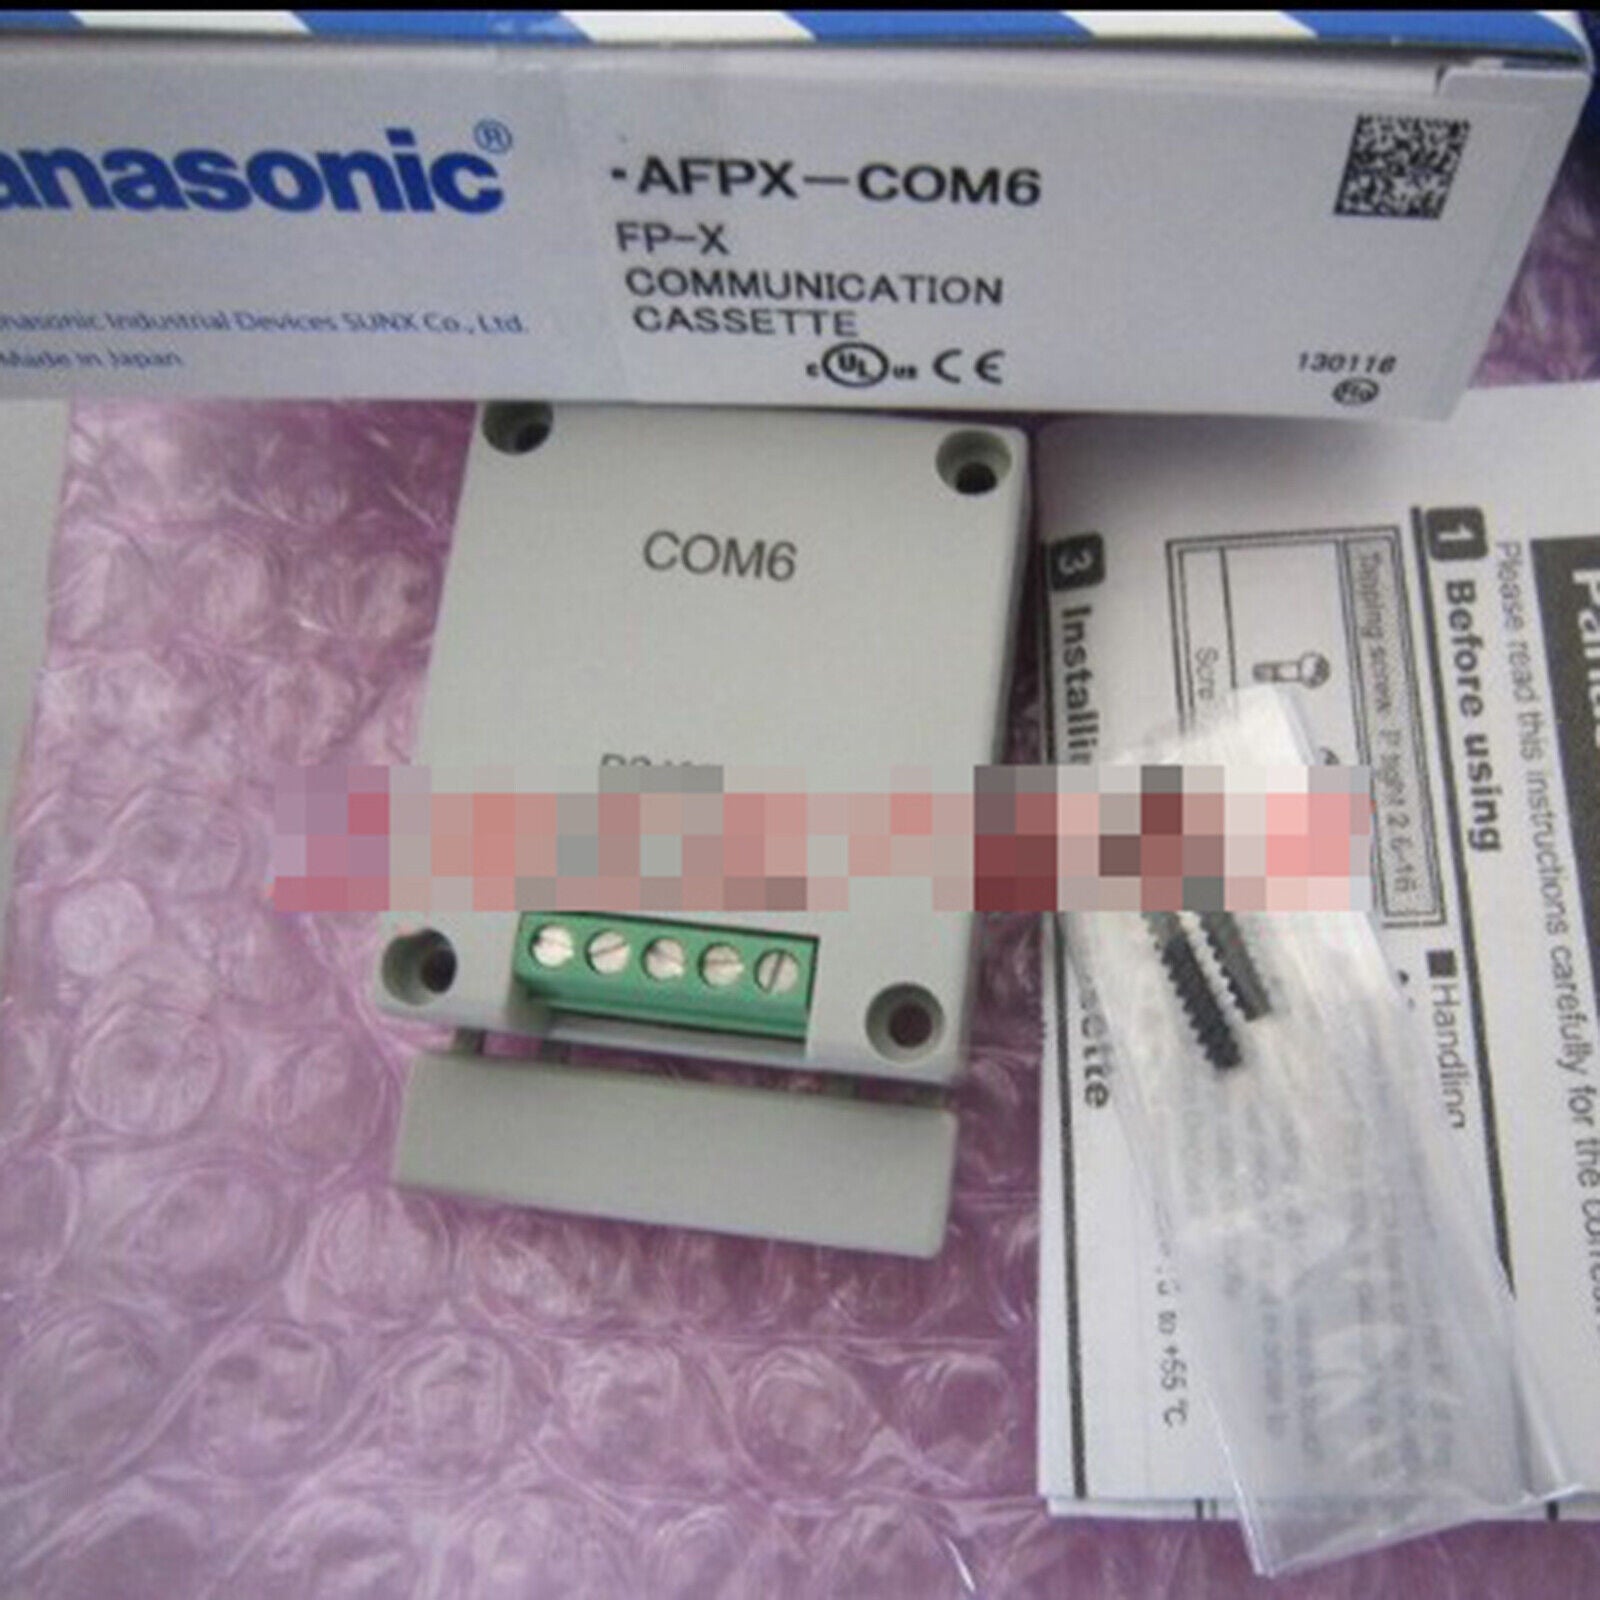 new 1pc  In Box Panasonic AFPX-COM6 Communication Cassette One year